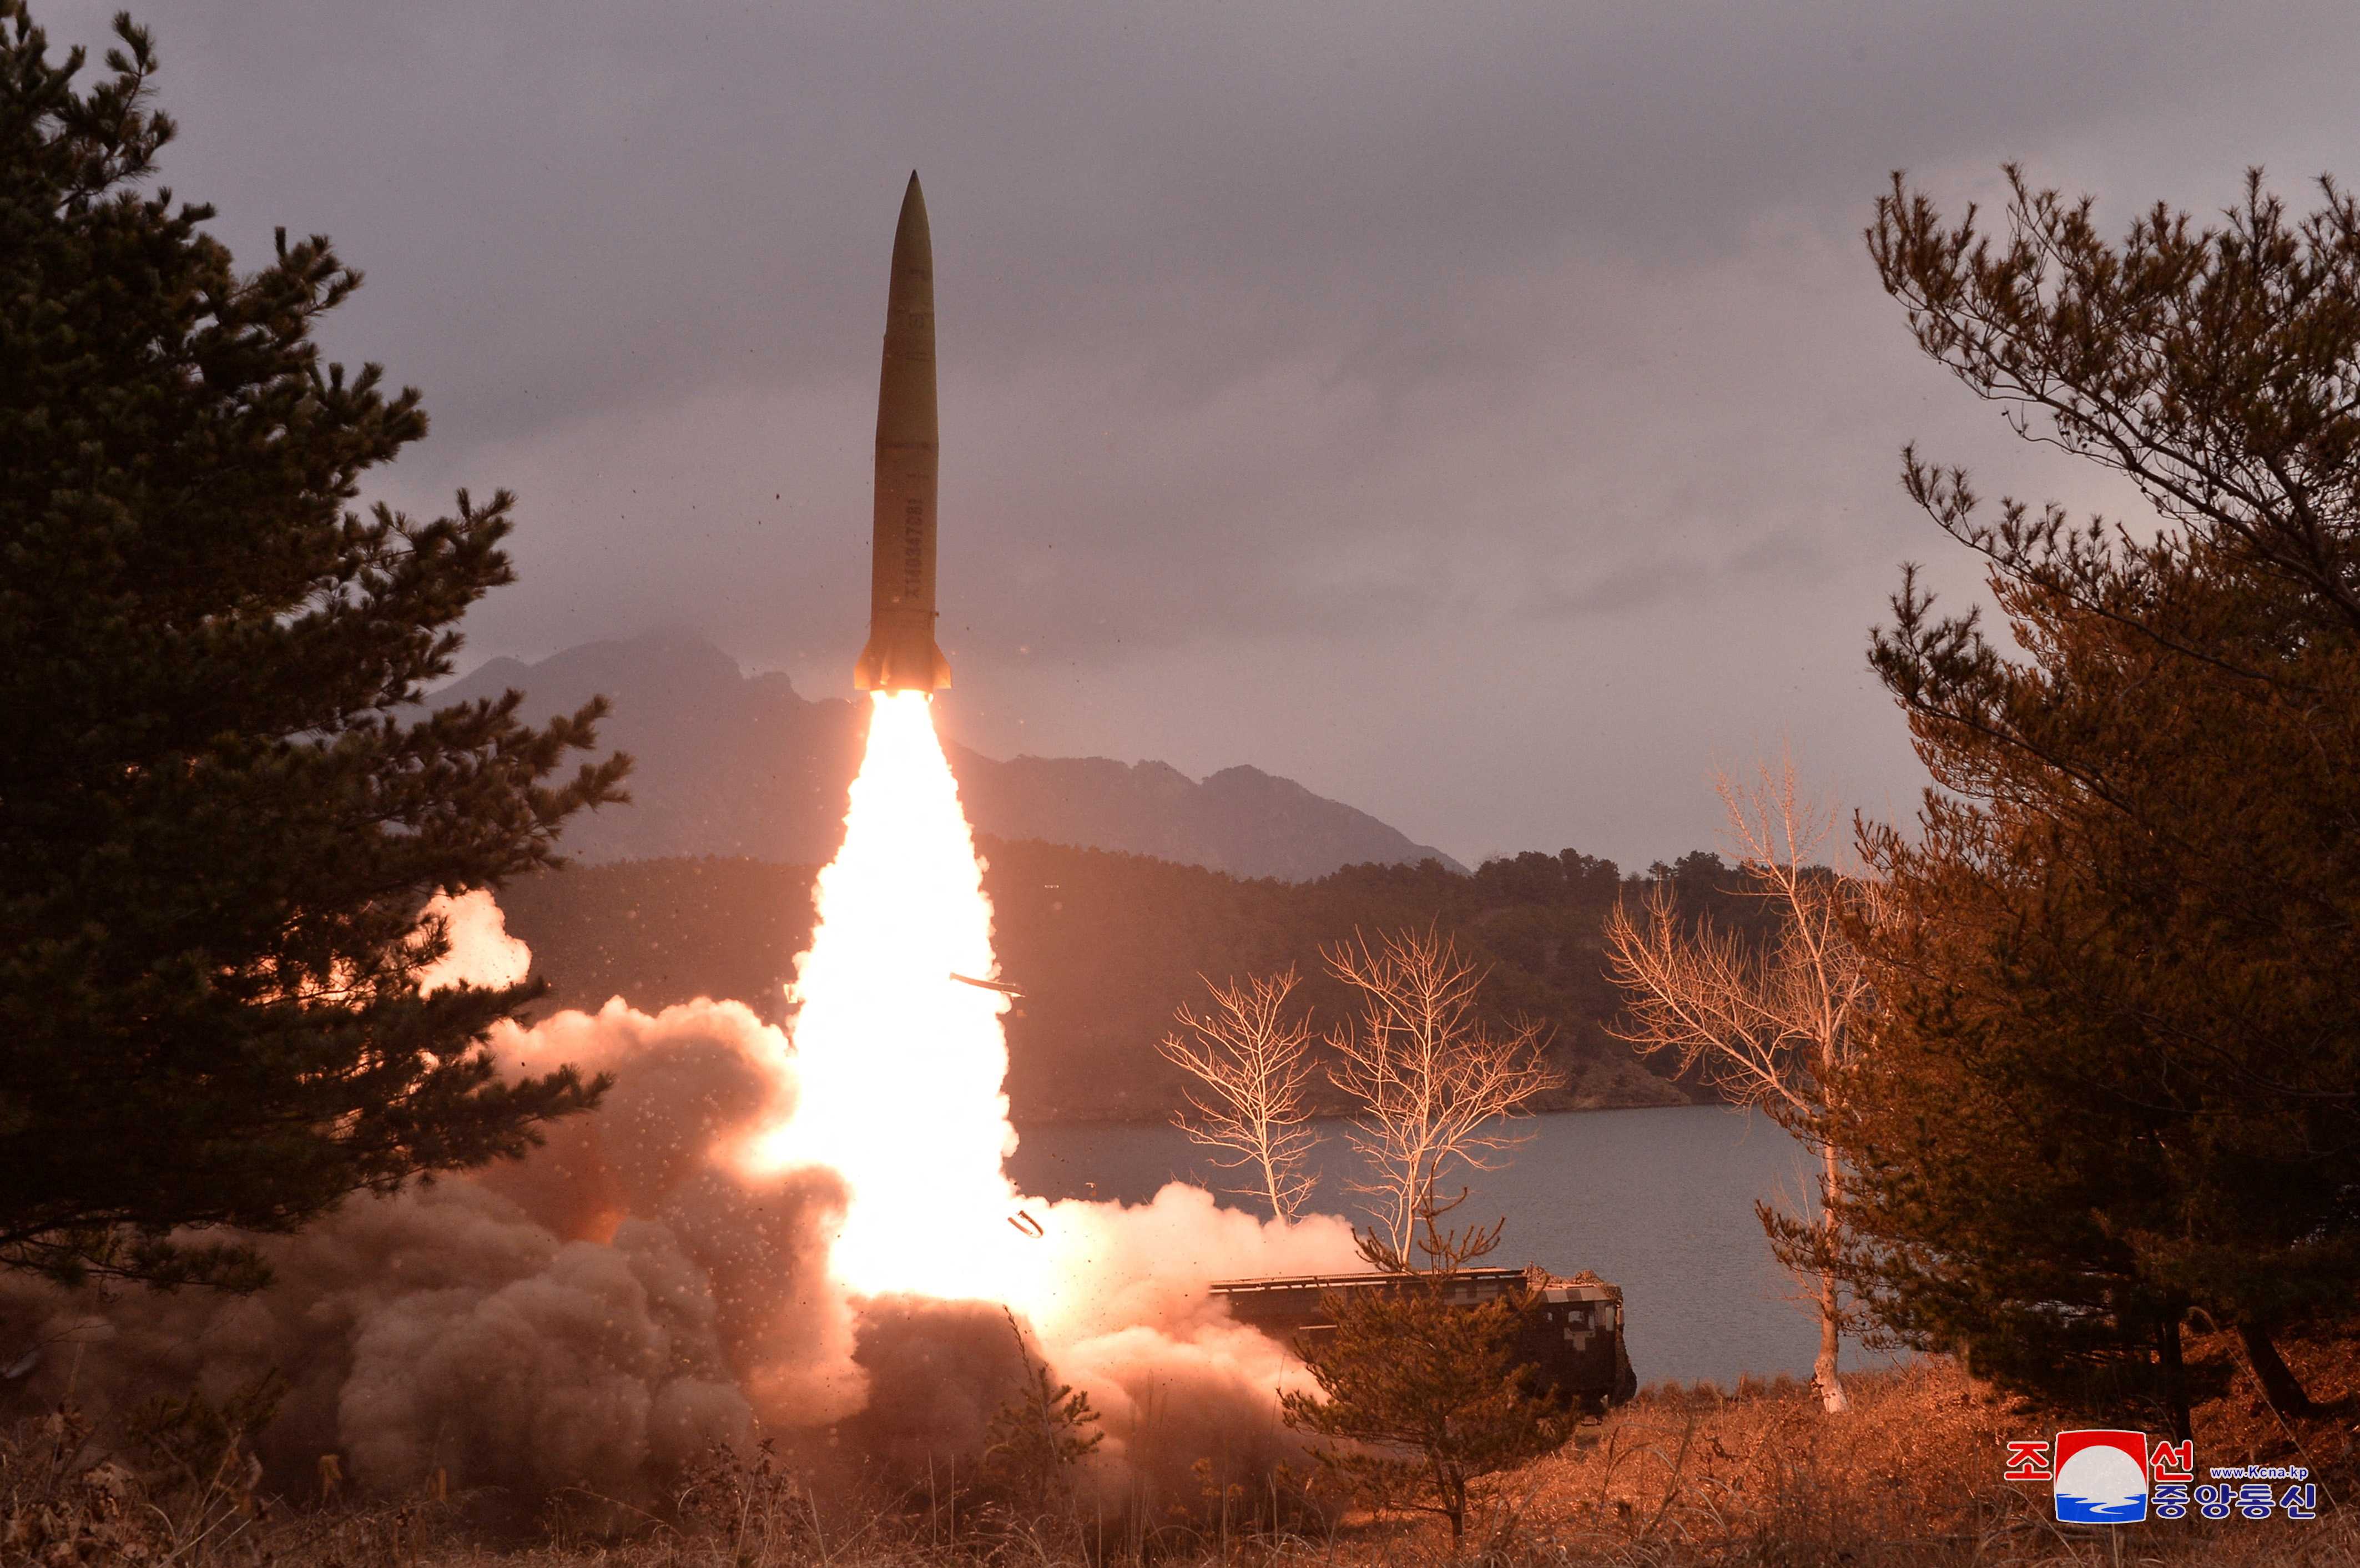 View shows a missile fired by the North Korean military at an undisclosed location